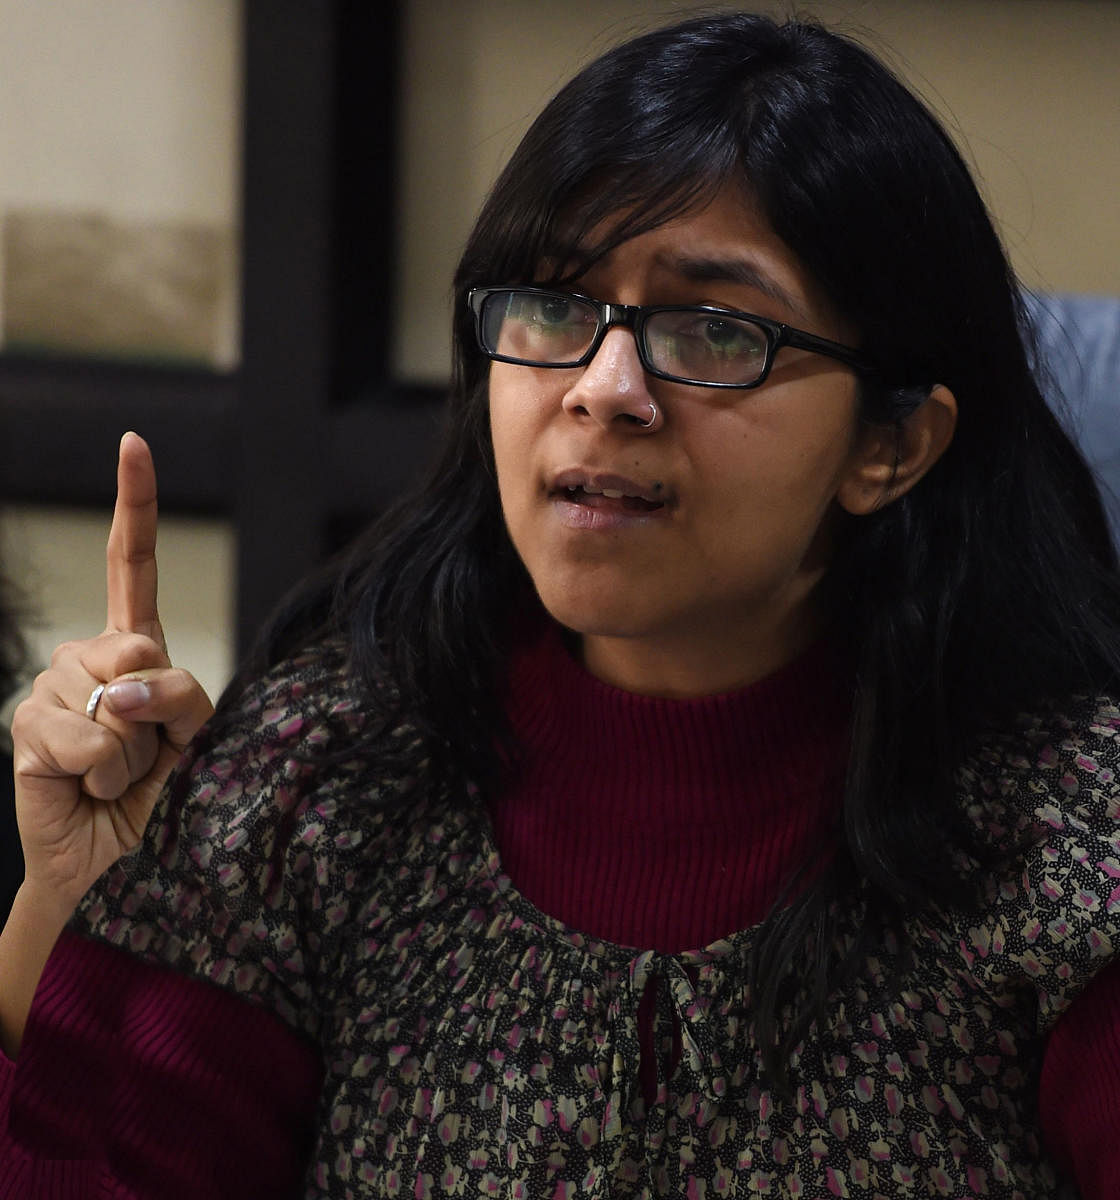 DCW notice to police over journalist's snatching case